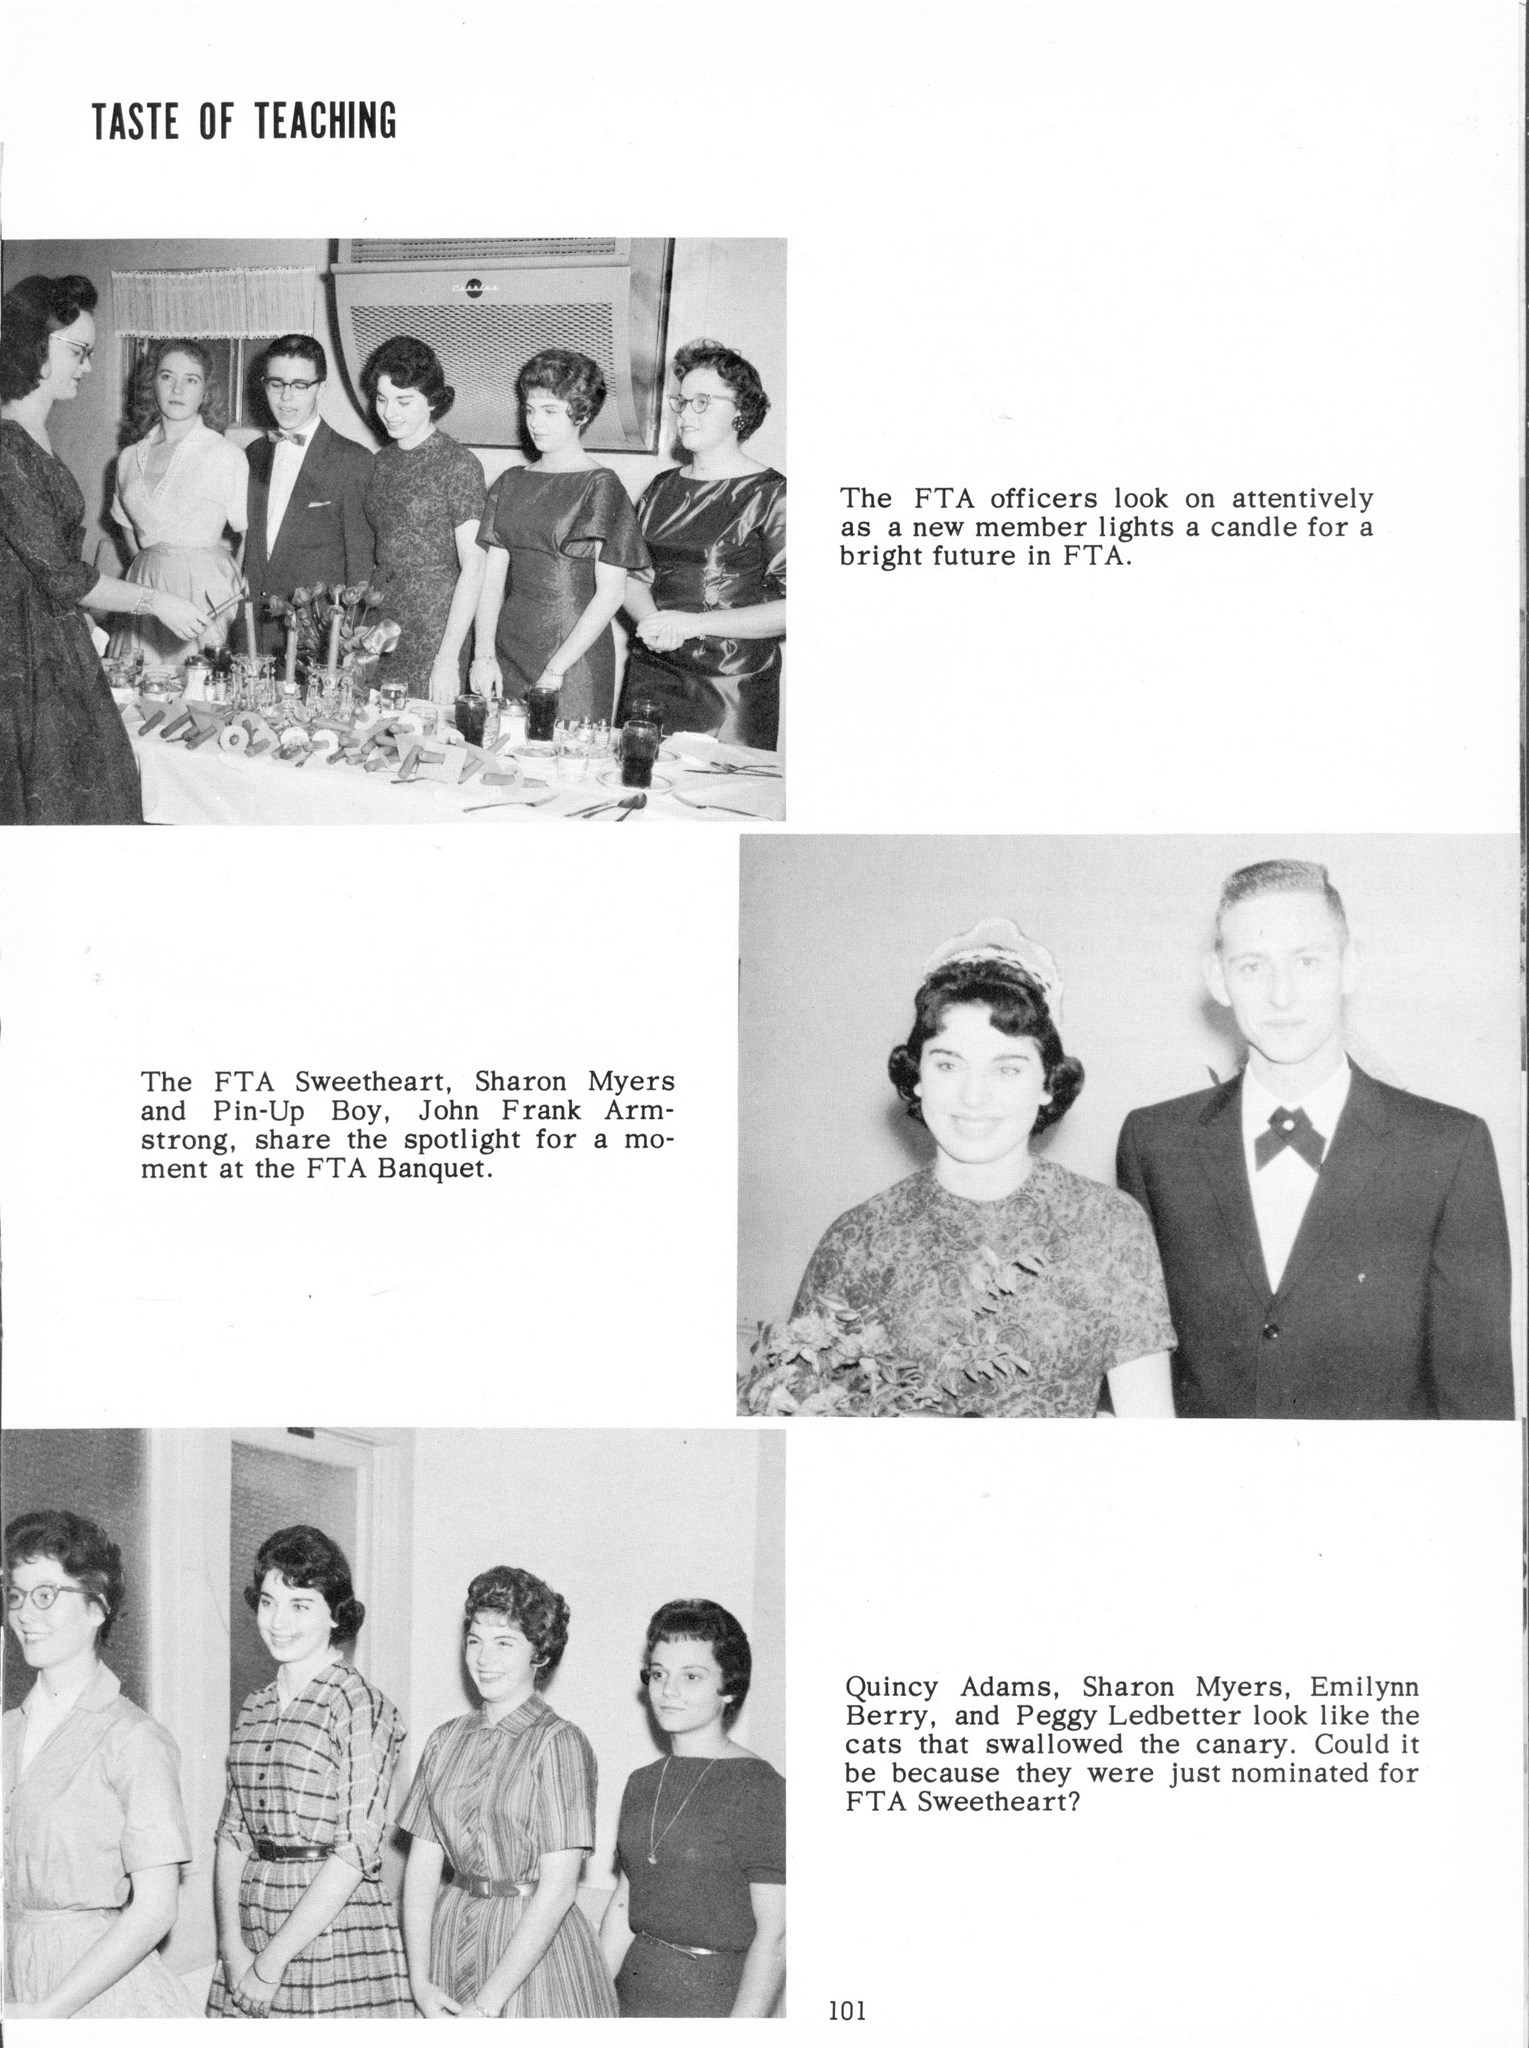 ../../../Images/Large/1960/Arclight-1960-pg0101.jpg